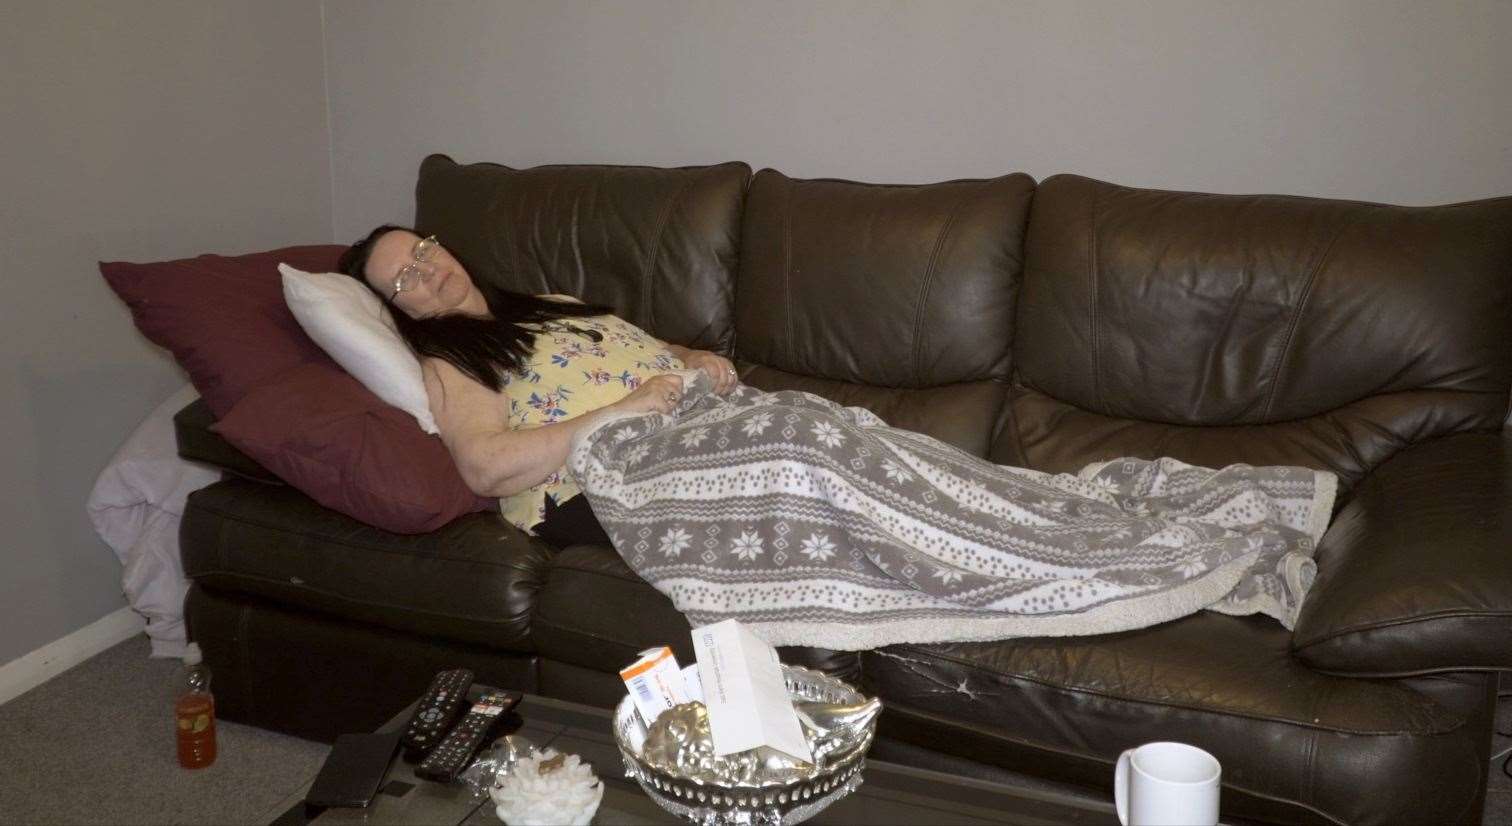 Jane Roberts, 59, says she is forced to sleep on her sofa due to noise issues